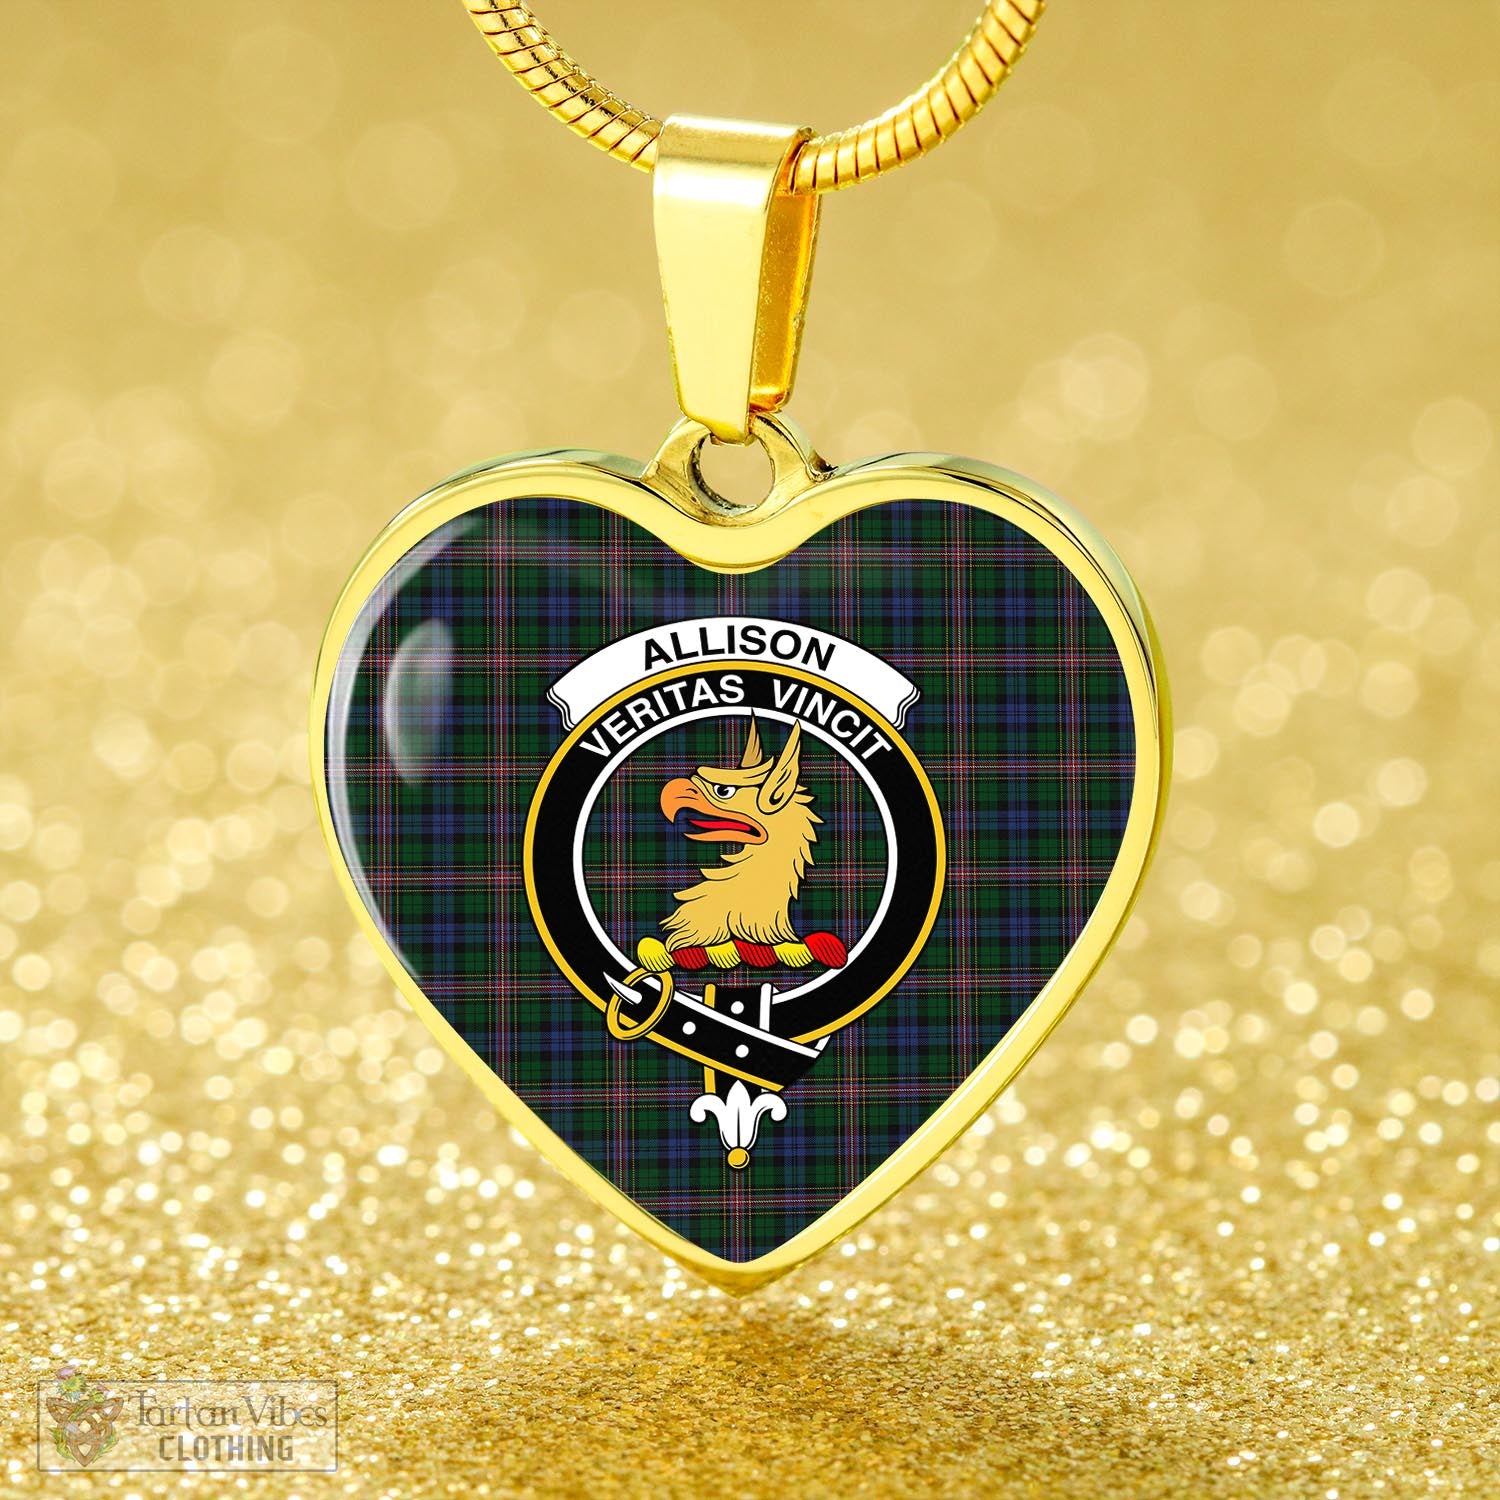 Tartan Vibes Clothing Allison Tartan Heart Necklace with Family Crest